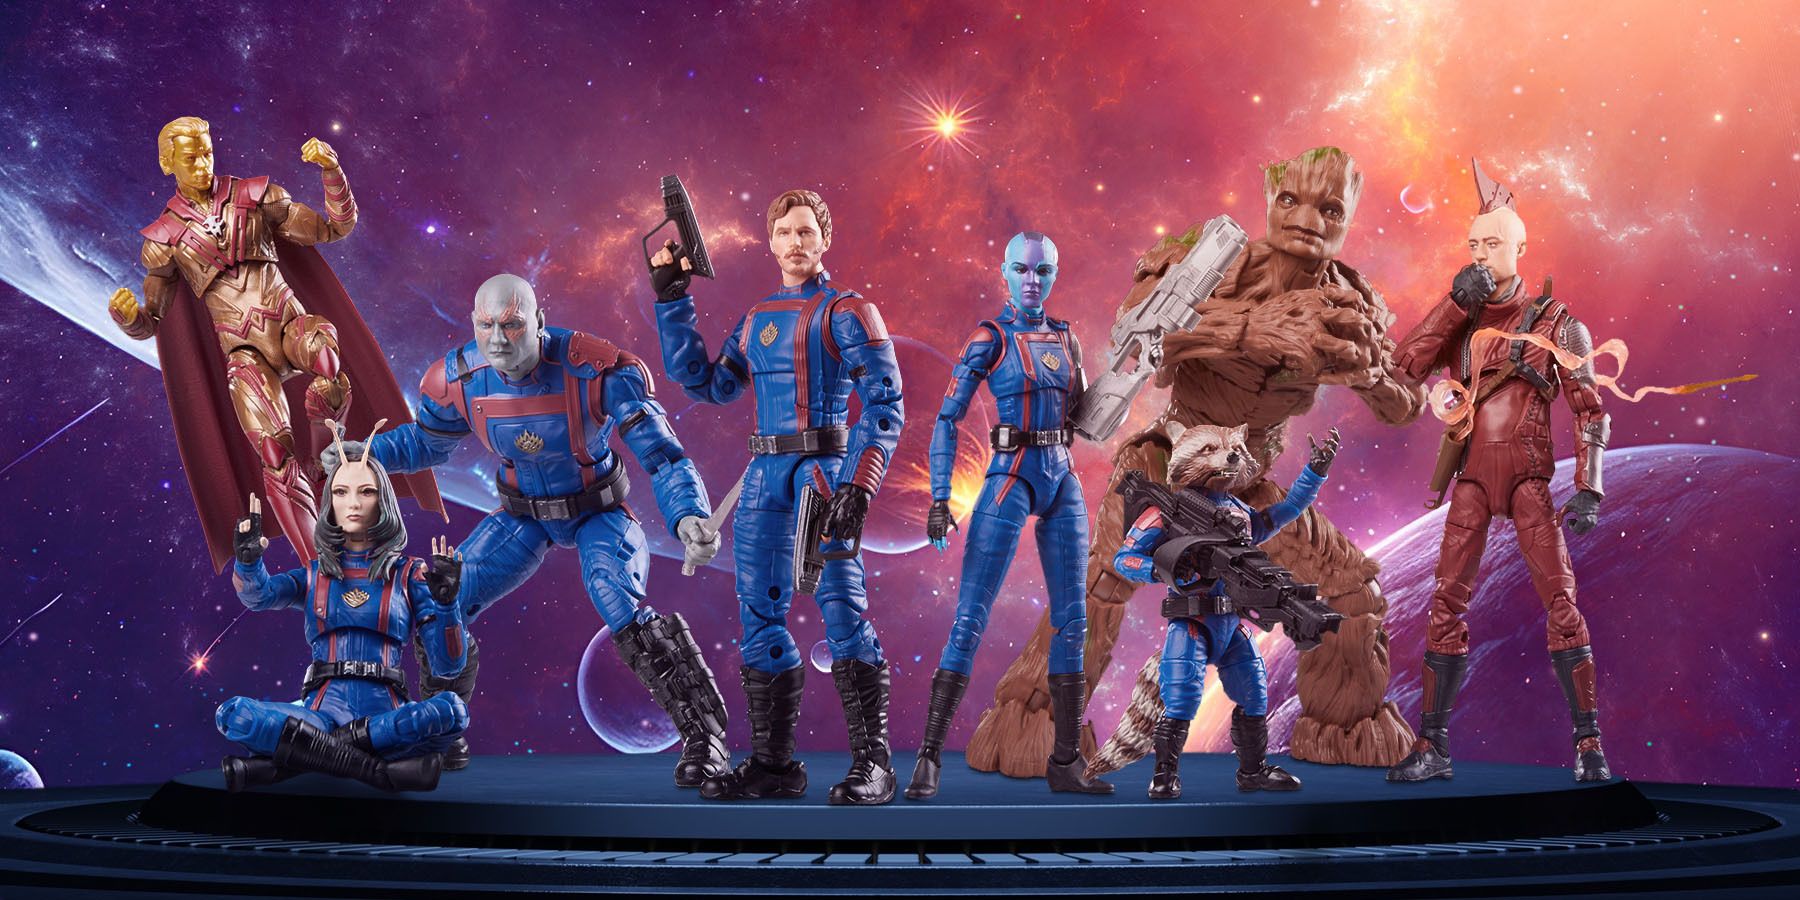 Marvel Legends STAR-LORD Guardians of the Galaxy Vol 3 Cosmo BAF